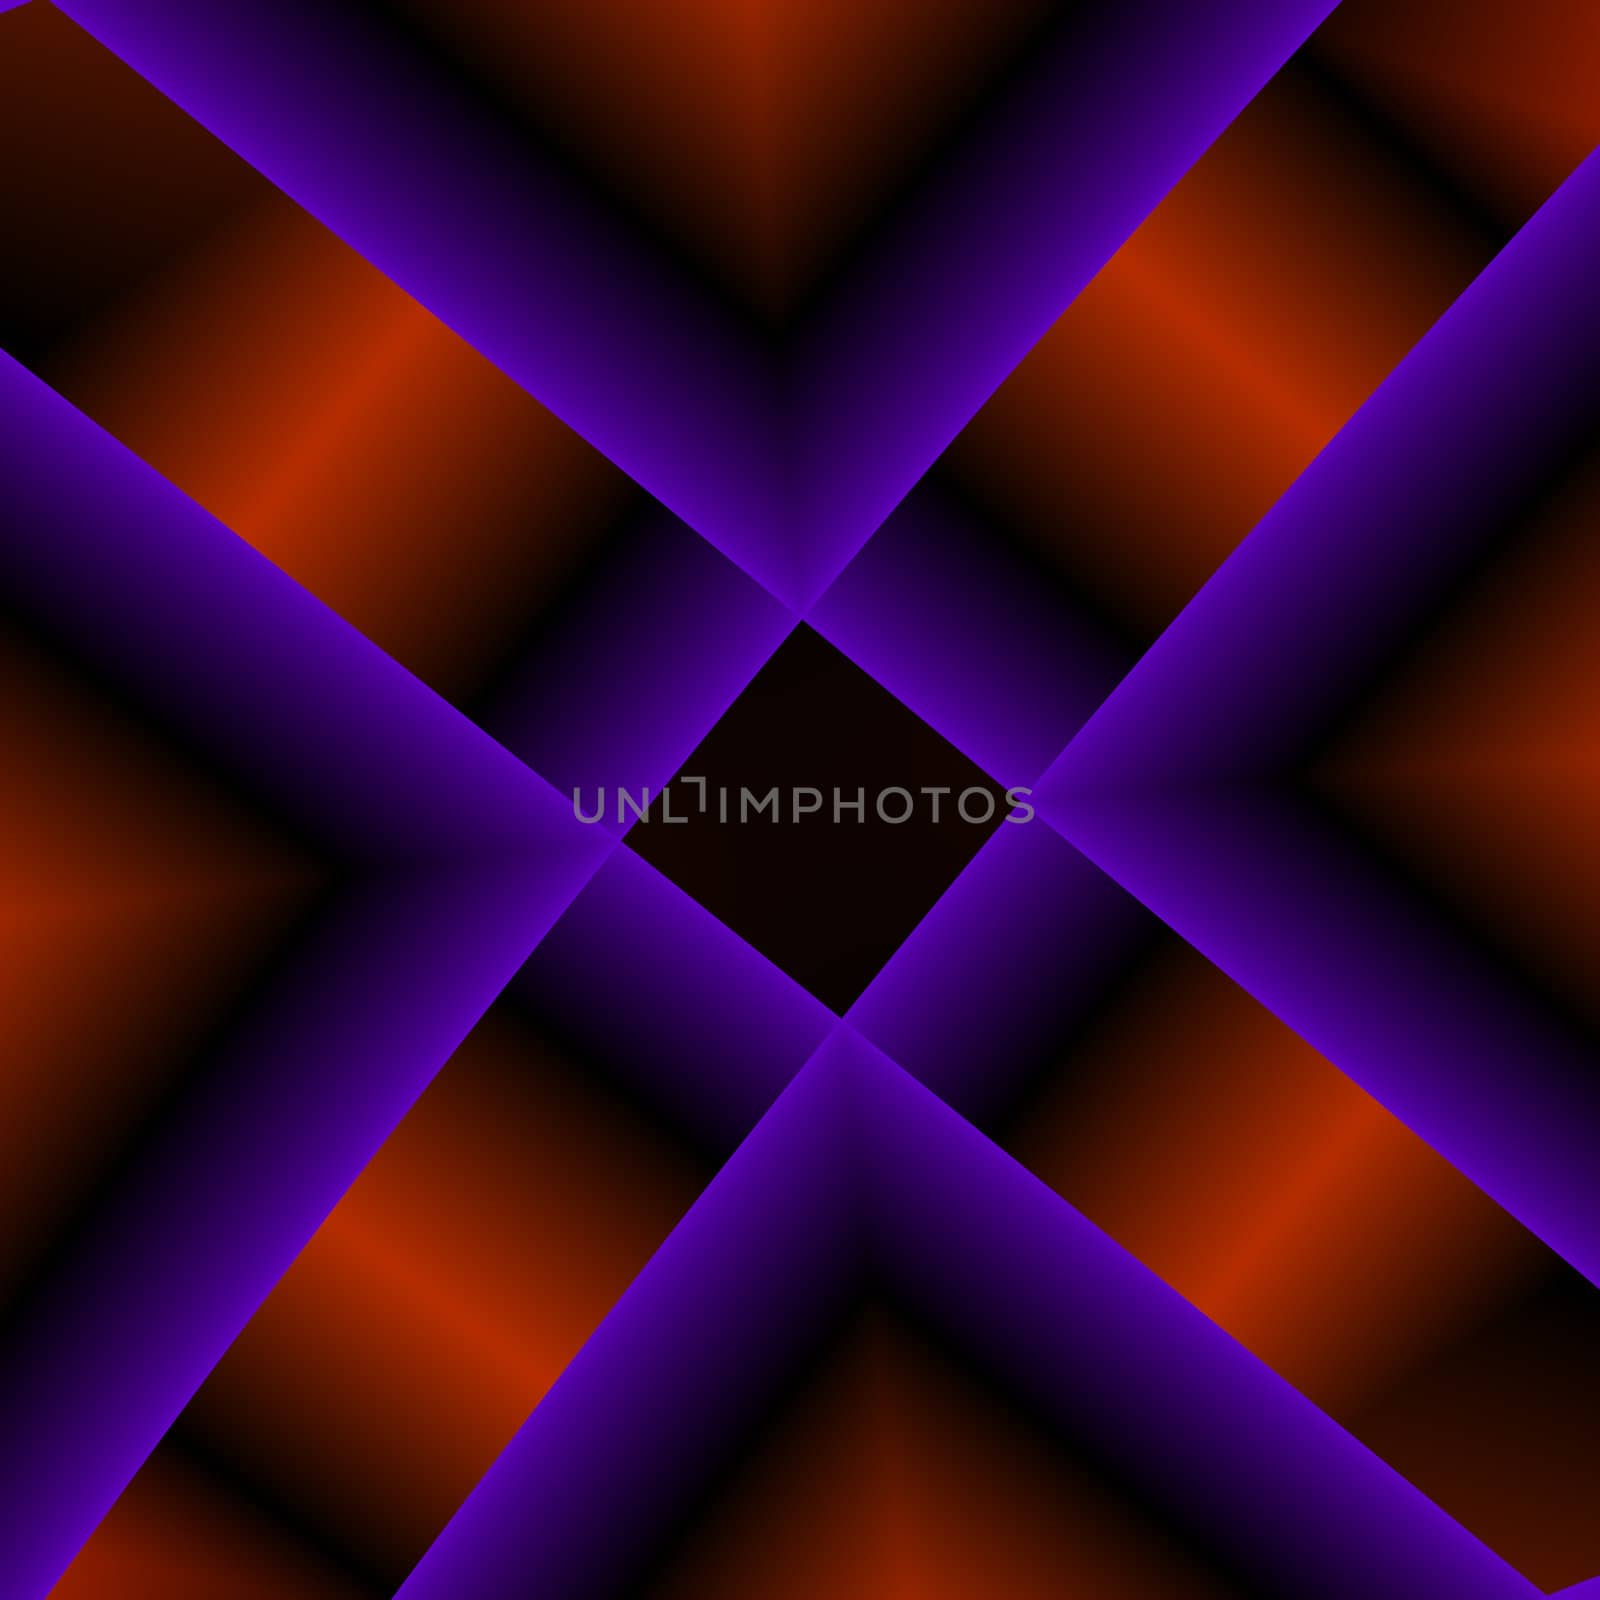 An abstract design of a purple X with red accents on a black background.